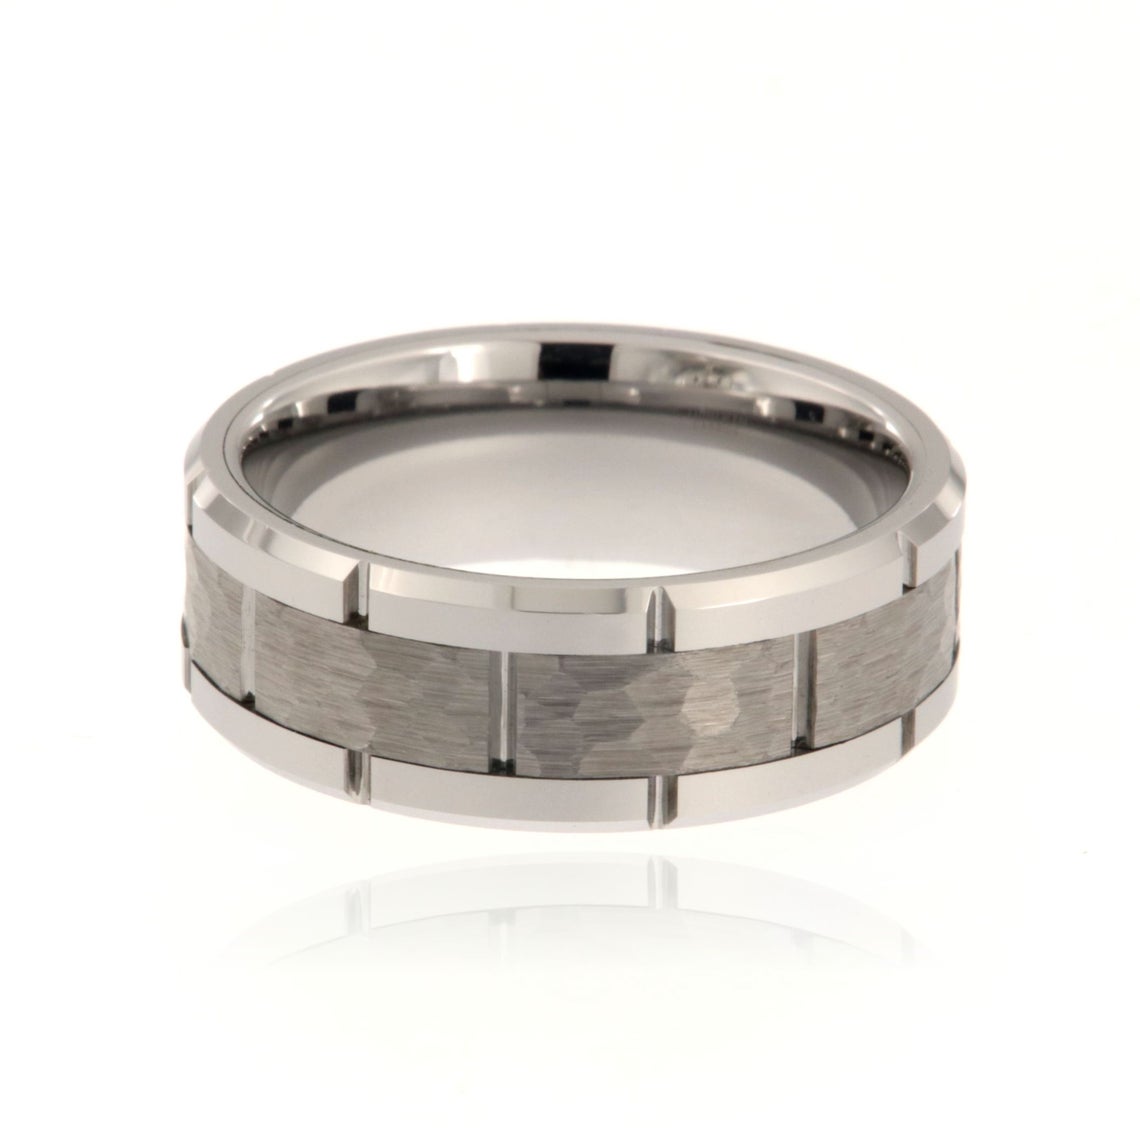 8mm wide tungsten ring with a brick-like design, a hammered finish, and beveled edges